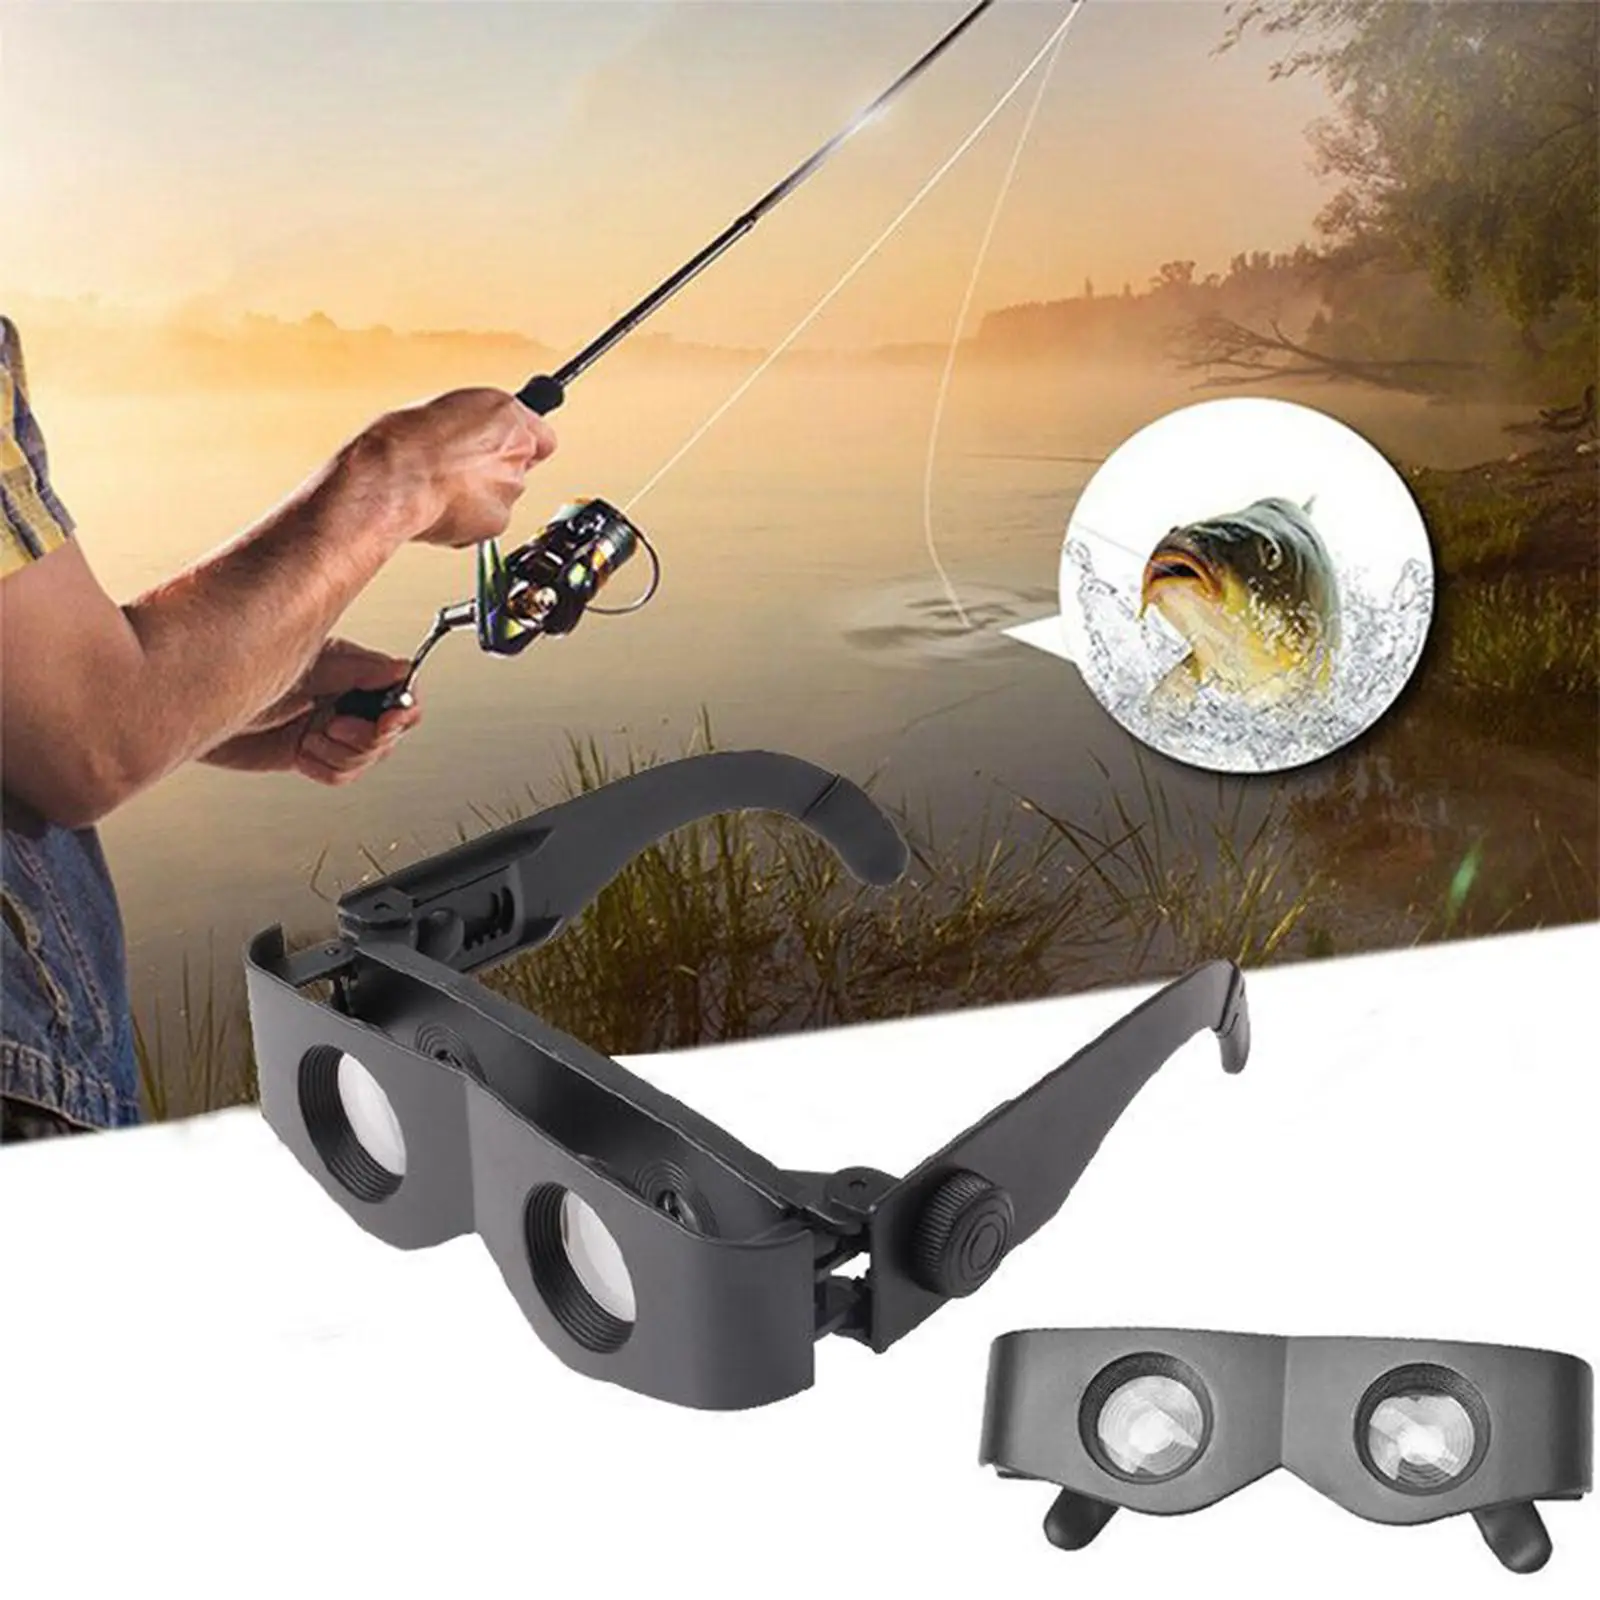 Fishing Binoculars Glasses Magnifying Telescope for Bird Watching Sports Concerts Adults Kids Outdoor Hands Free Glasses